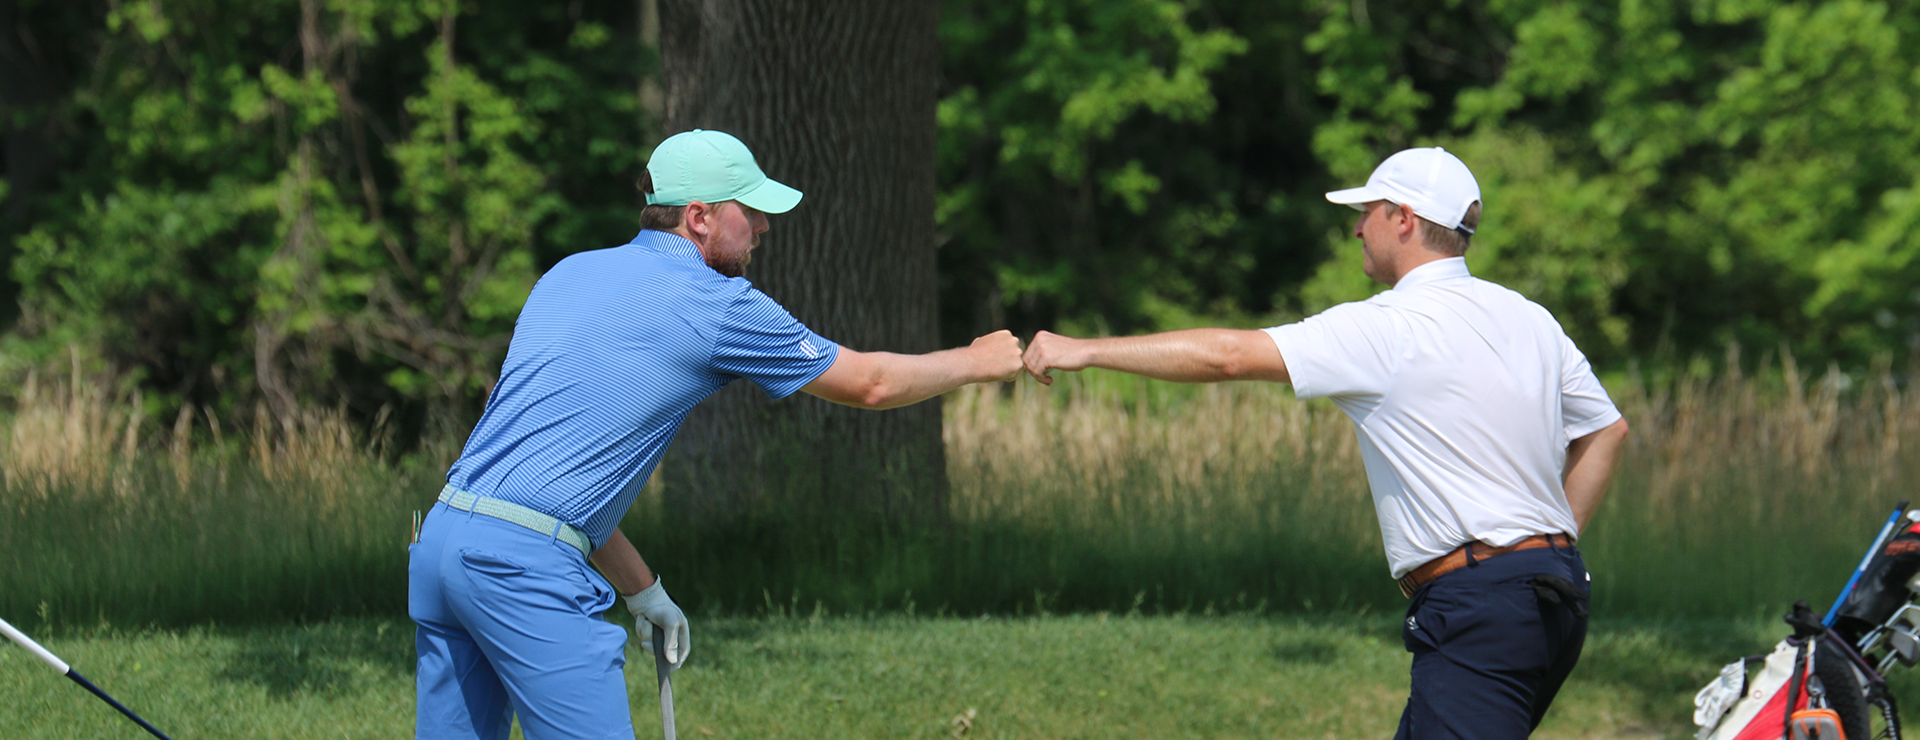 On to the Semifinals at the U.S. Amateur Four-Ball